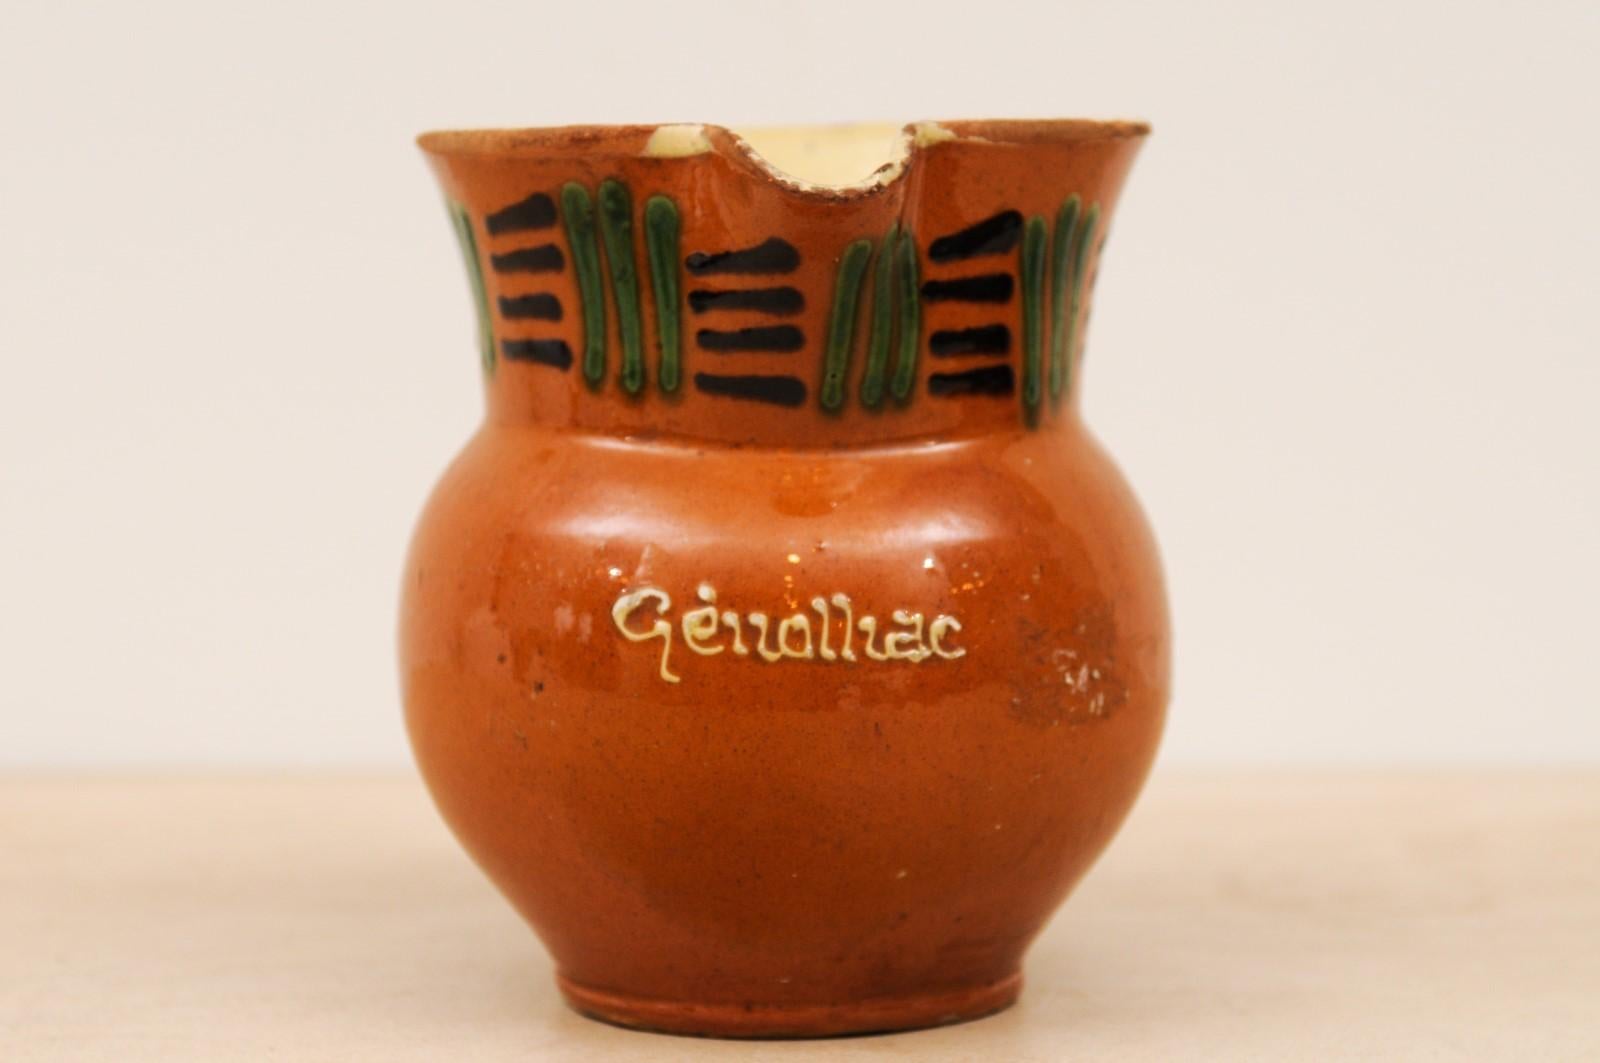 French 19th Century Terracotta Pitcher from Génolhac with Russet Colored Glaze For Sale 5